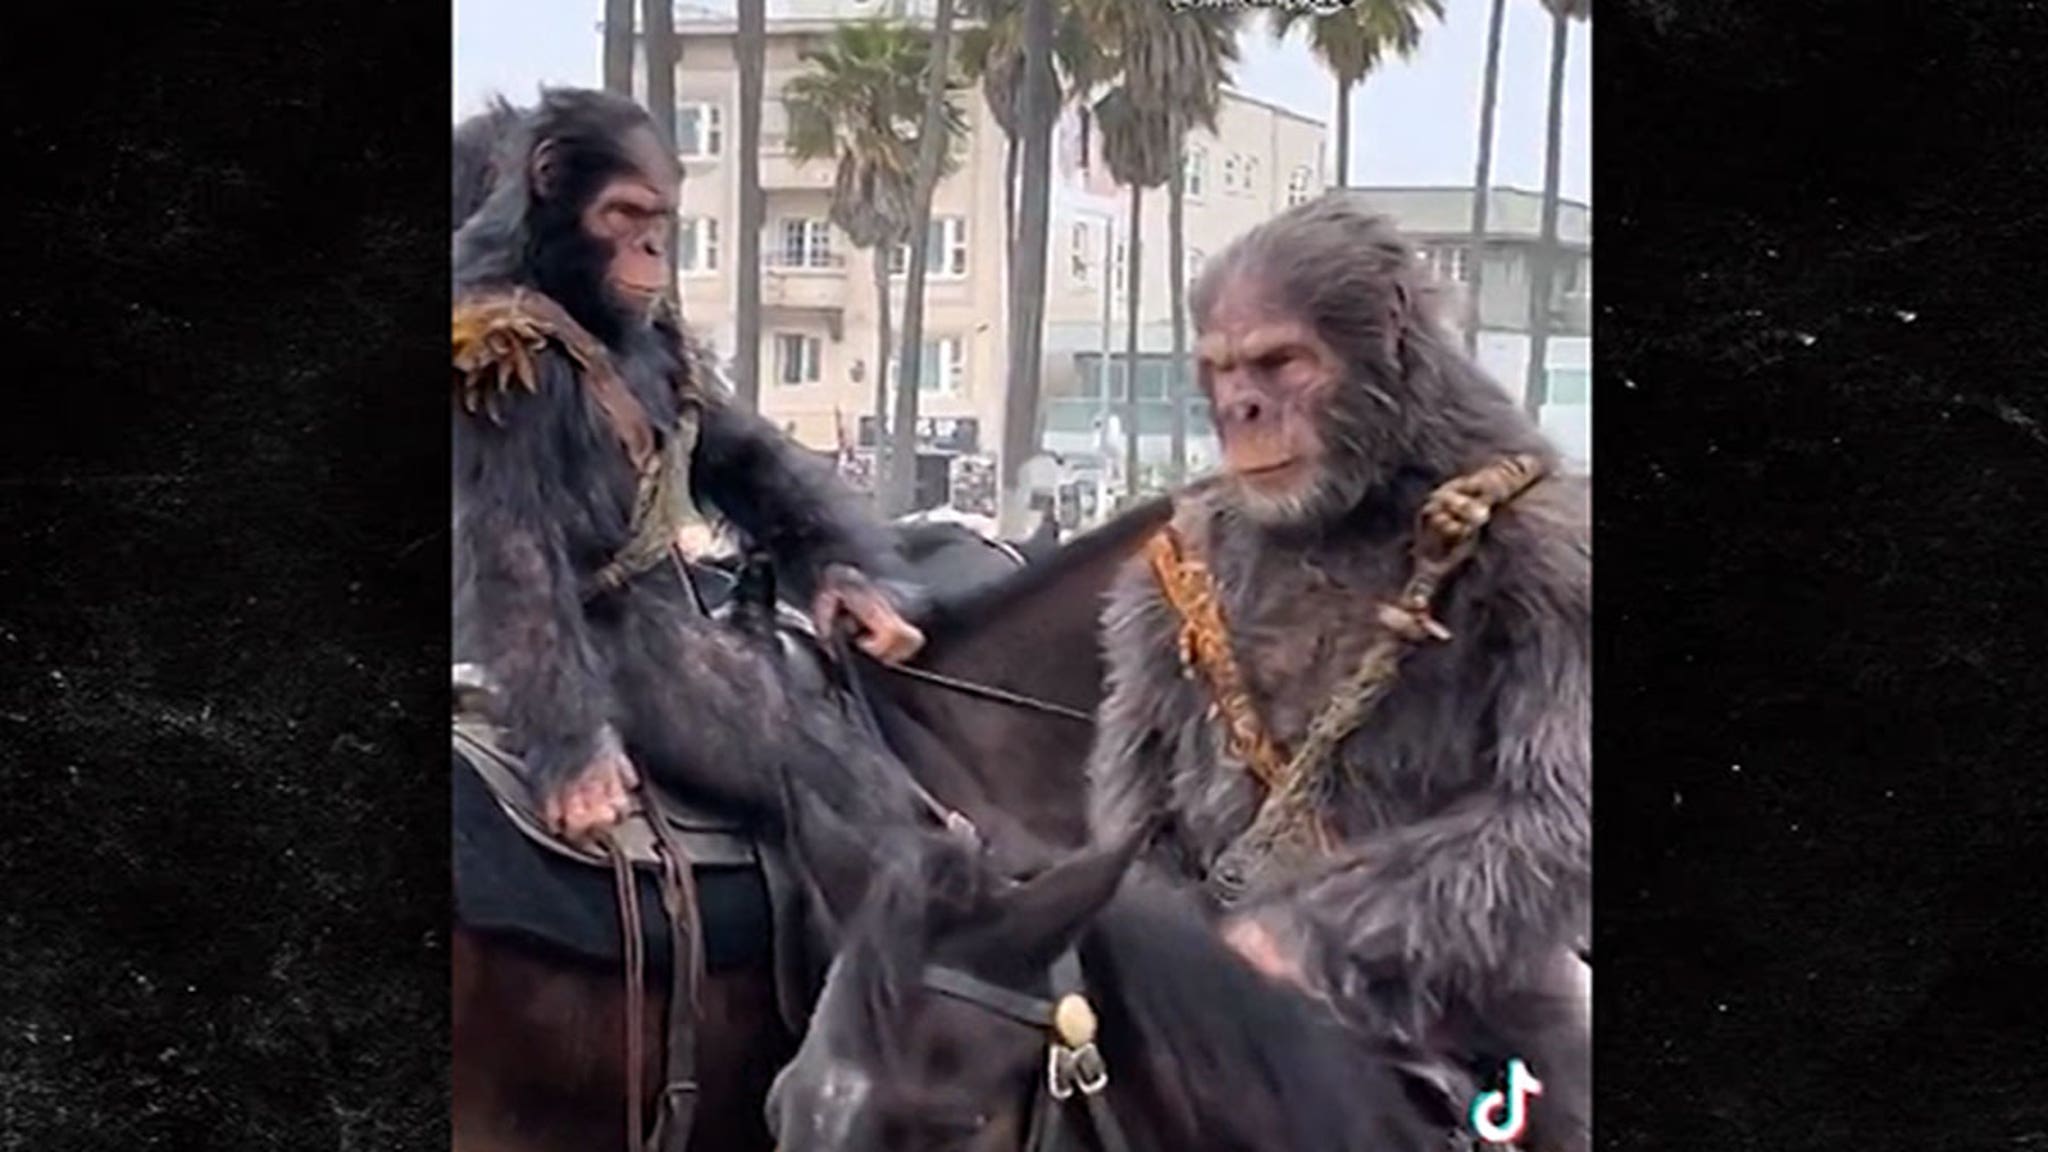 The “monkeys” ride to Venice Beach on horseback for the new “Planet of the Apes” promotion